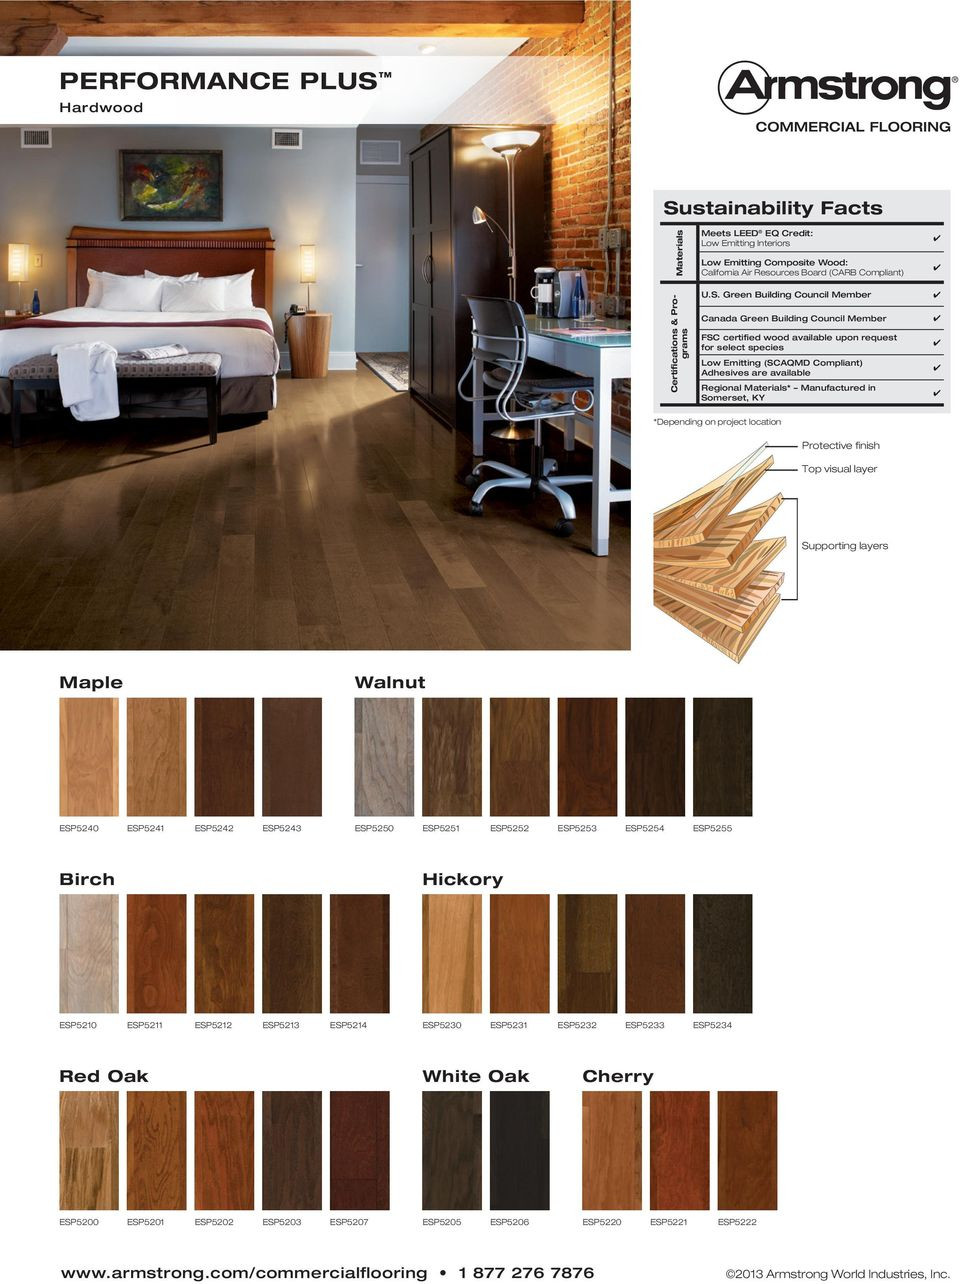 hardwood floor refinishing dayton oh of performance plus installation maintenance tip sheet pdf within green building council member canada green building council member fsc certified wood available upon request for